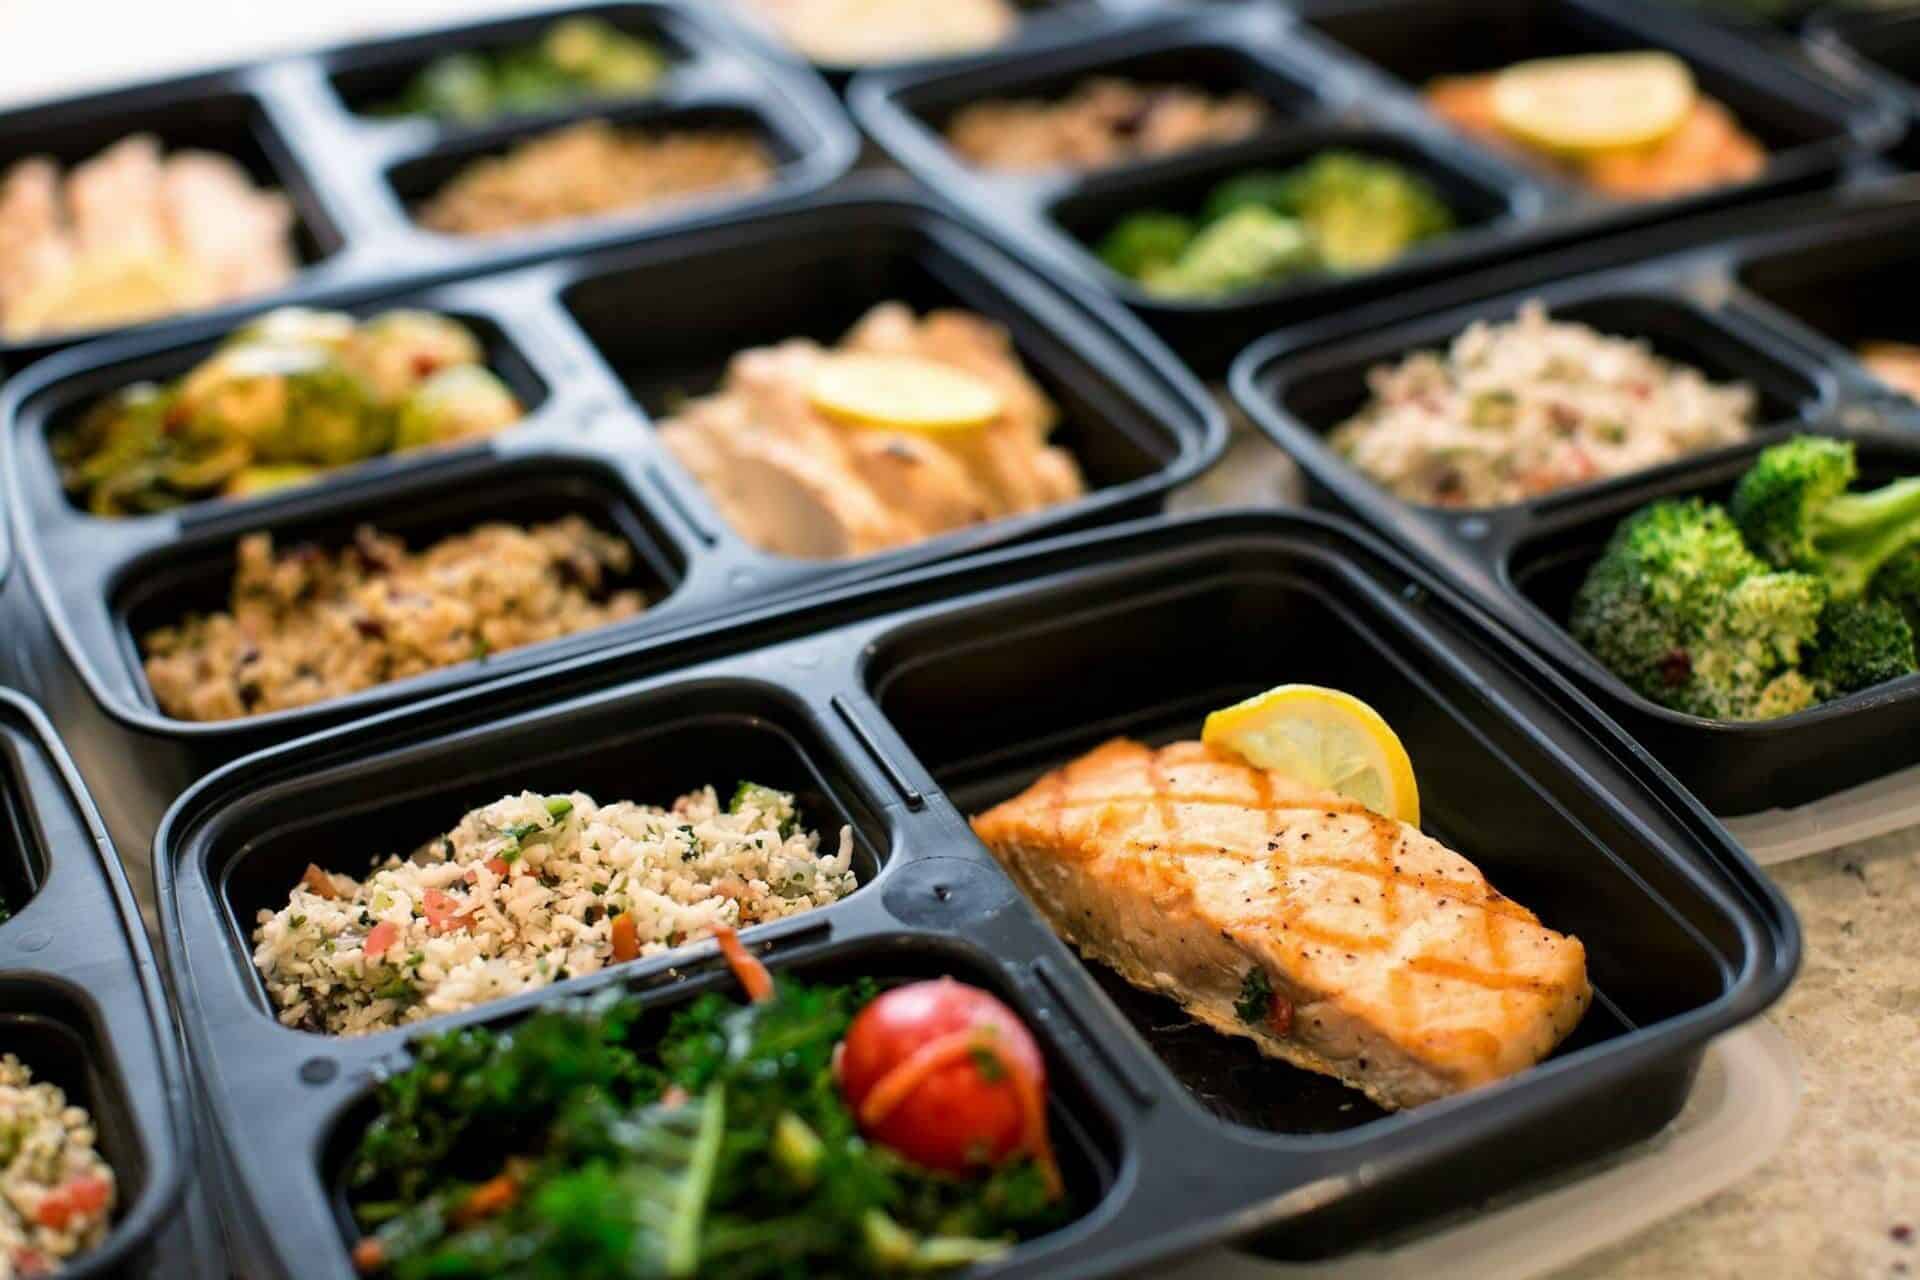 Top 10 Oven-Ready Prepared Meal Delivery Services